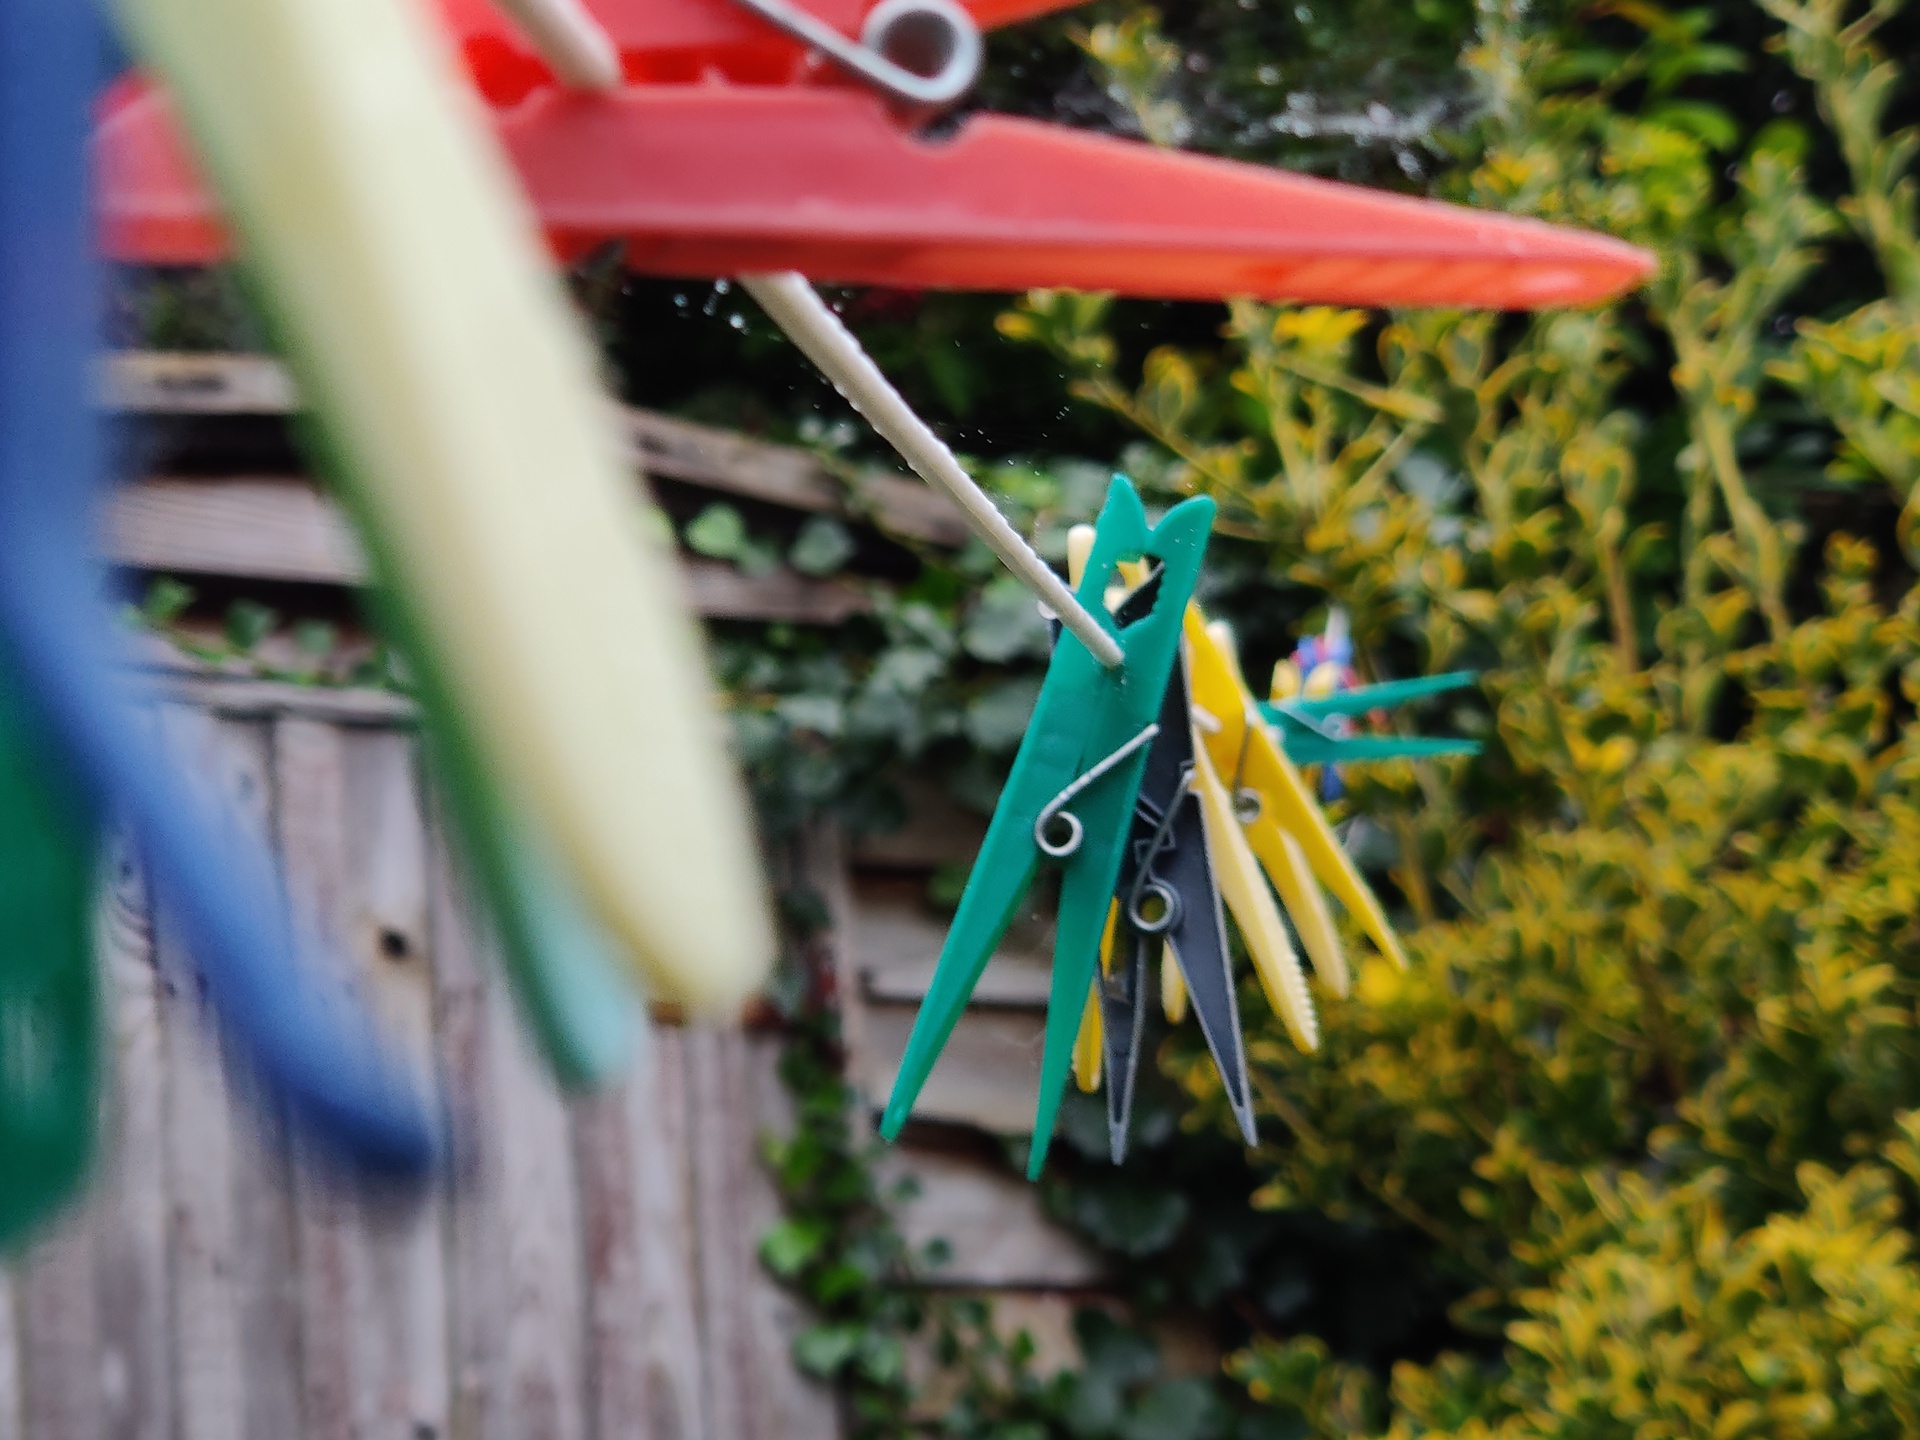 OnePlus 7T Pro Camera Sample Color shot of clothes pegs in a British garden